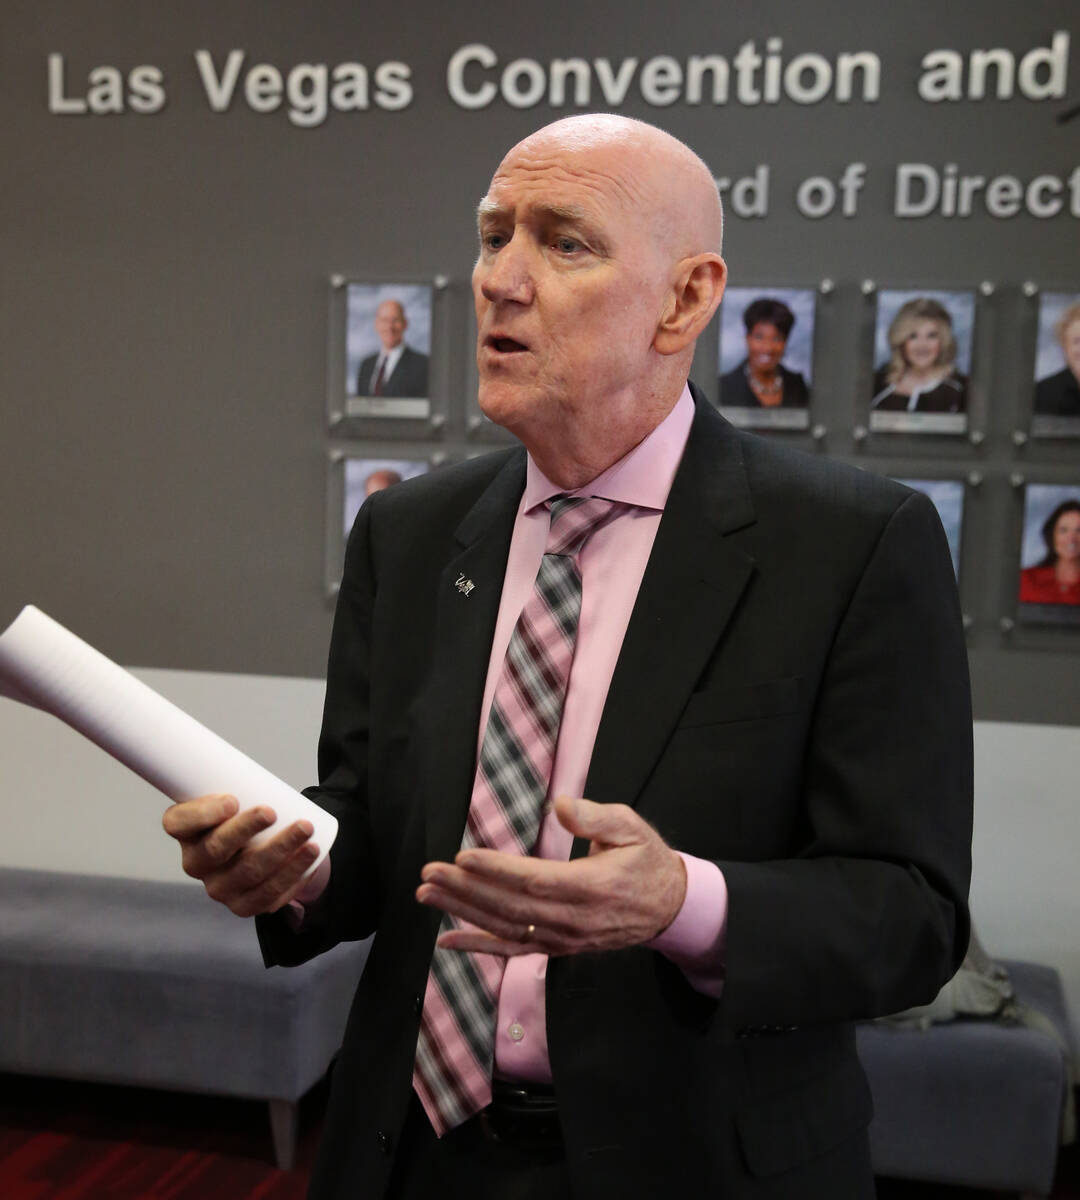 The Las Vegas Convention and Visitors Authority (LVCVA) Board Chairman and Clark County Commiss ...